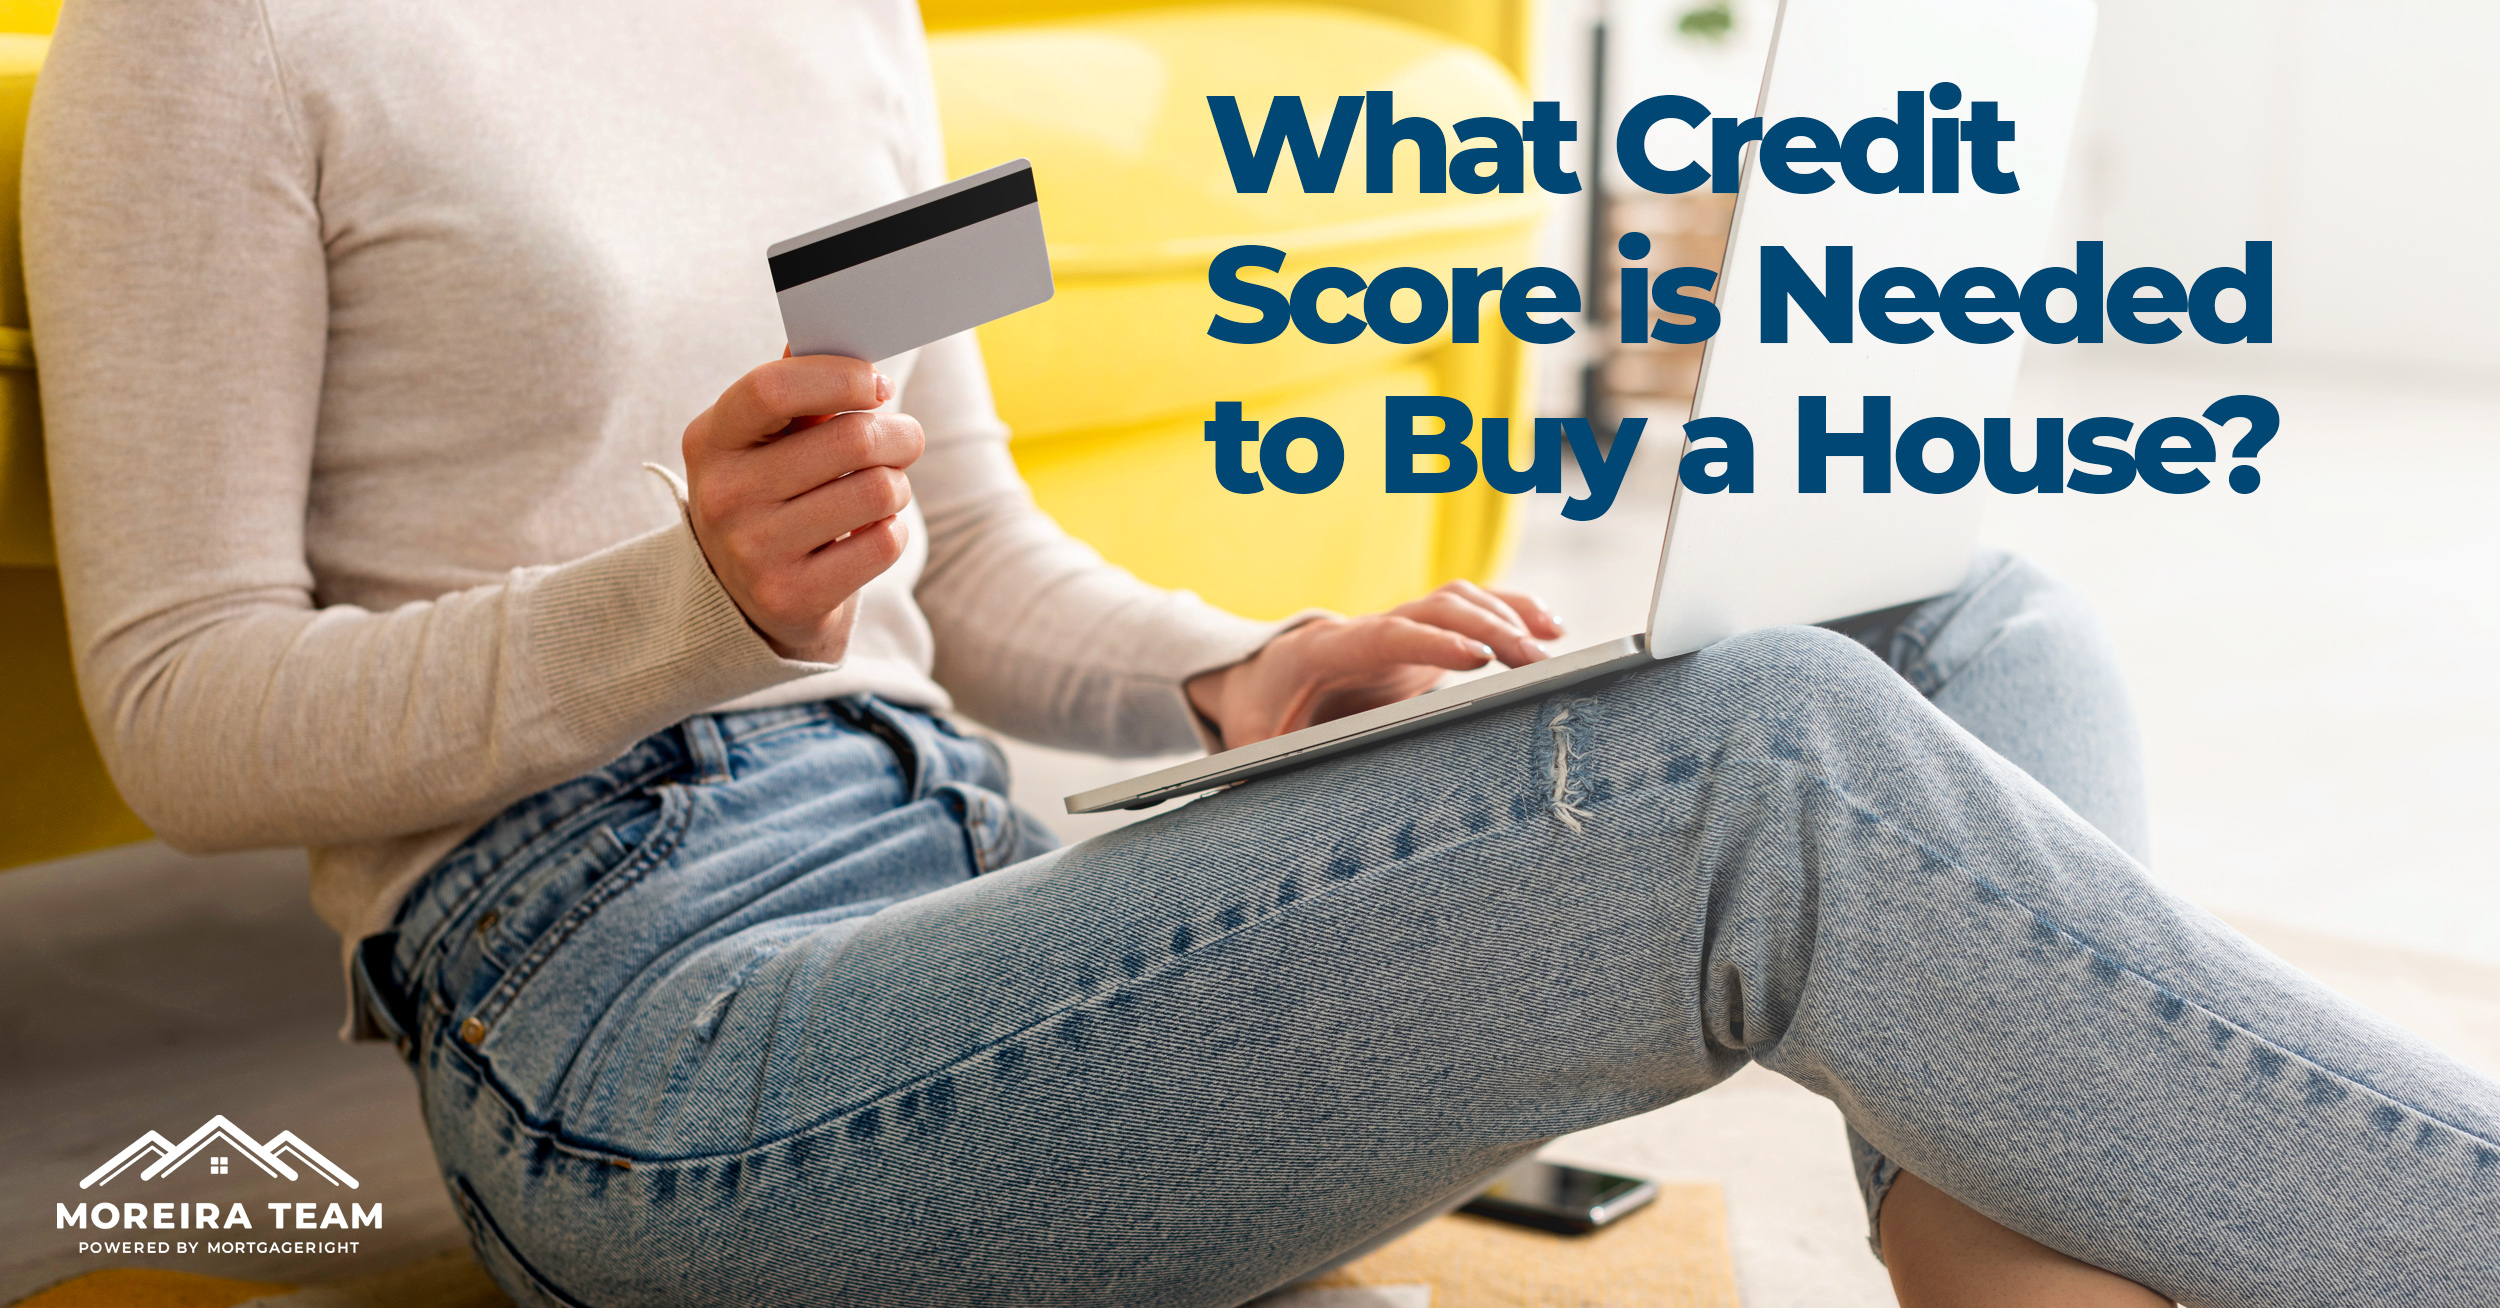 What Credit Score is Needed to Buy a House?